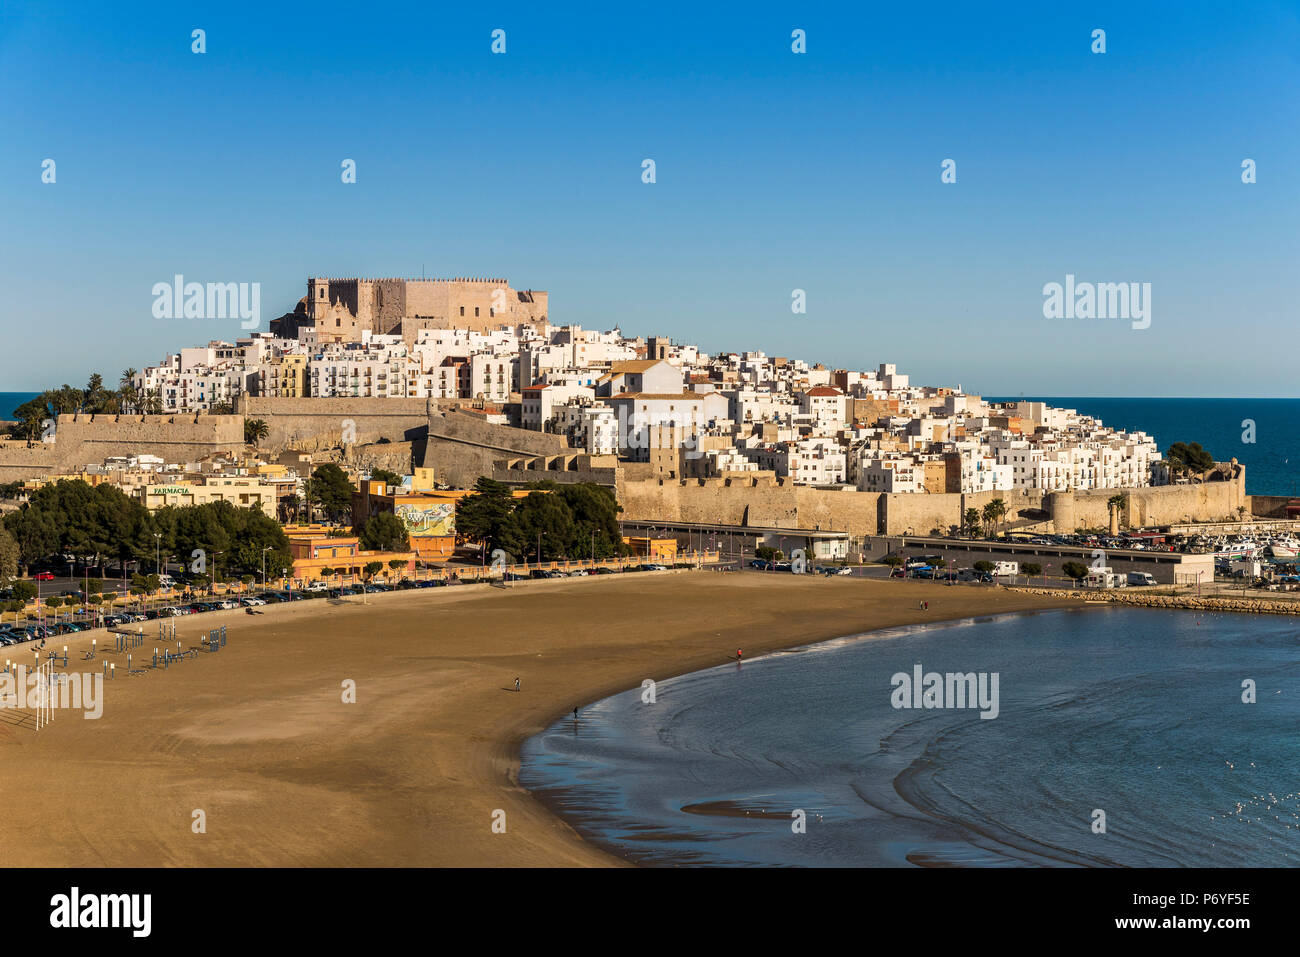 Top view of the fortified town of Peniscola, Comunidad Valenciana, Spain Stock Photo